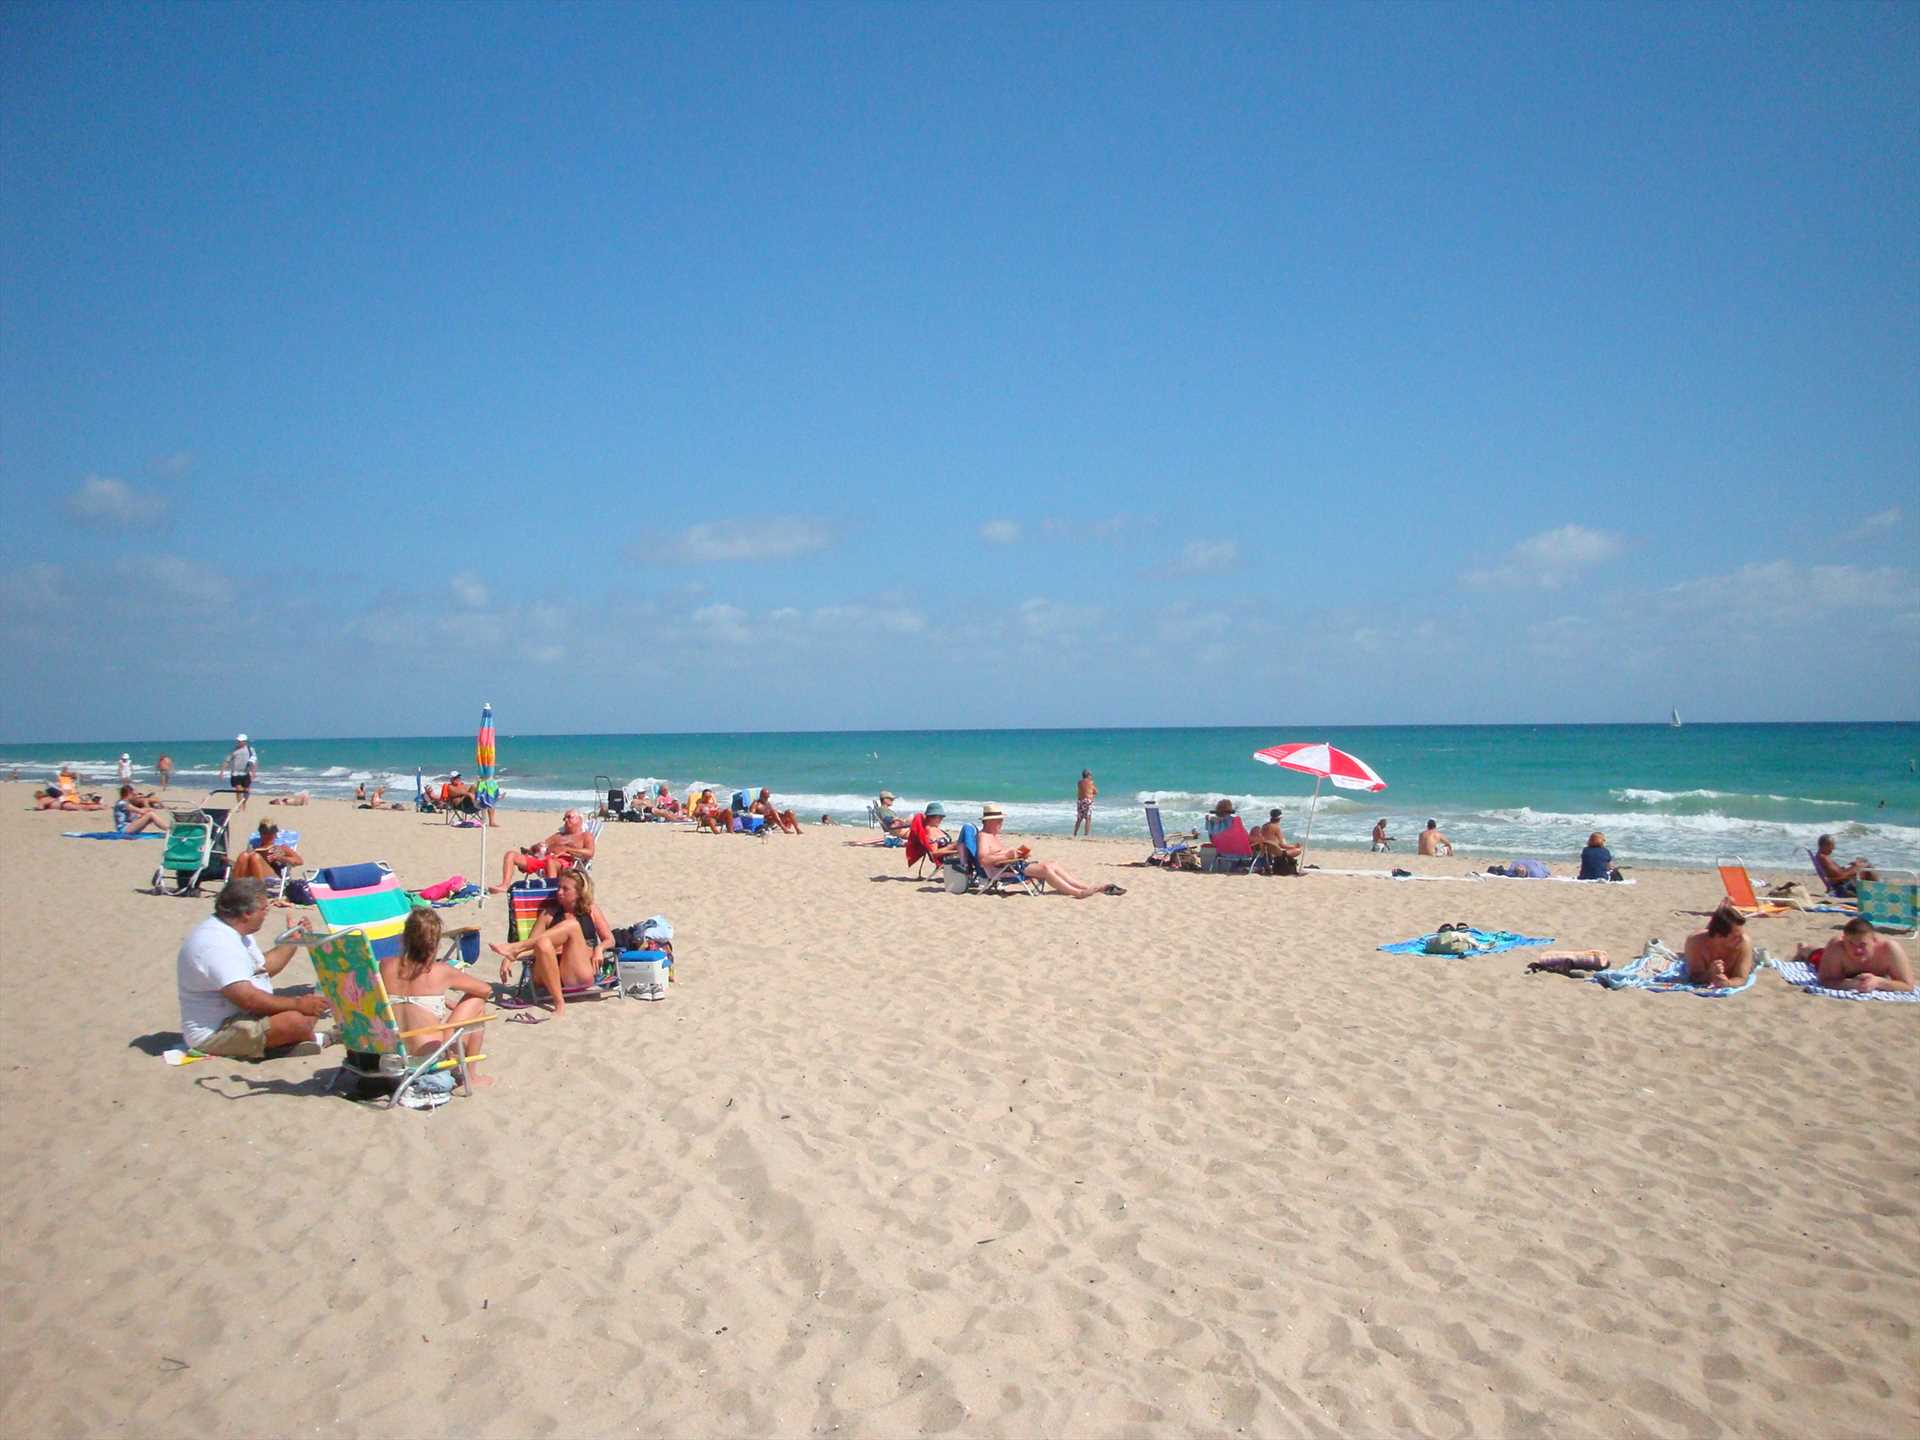 The wide uncrowded beach is one of South Florida